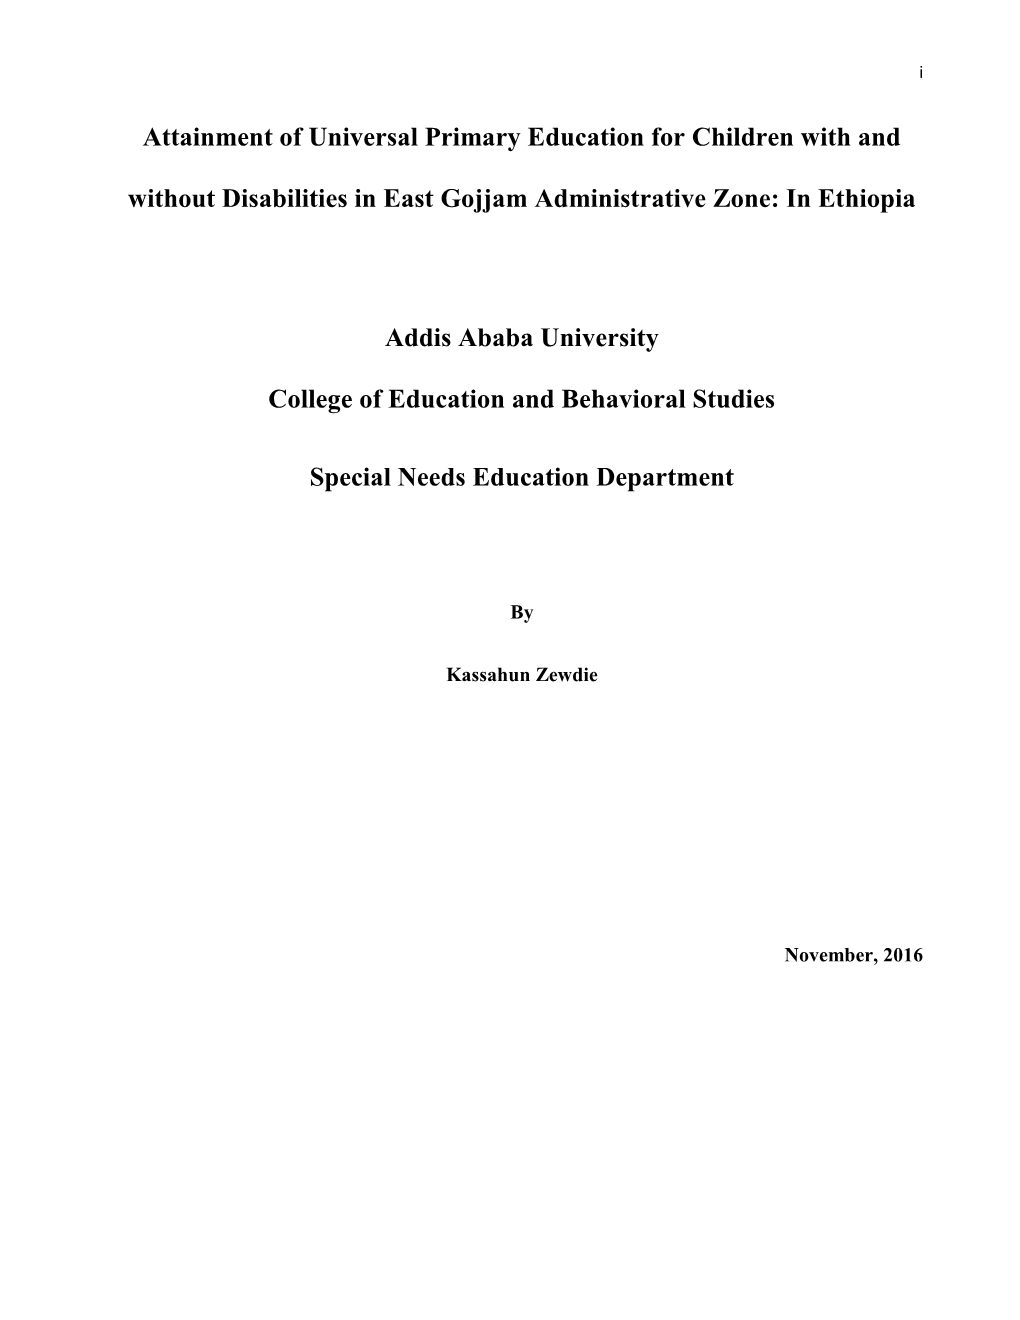 Attainment of Universal Primary Education for Children with and Without Disabilities in East Gojjam Administrative Zone: in Ethiopia